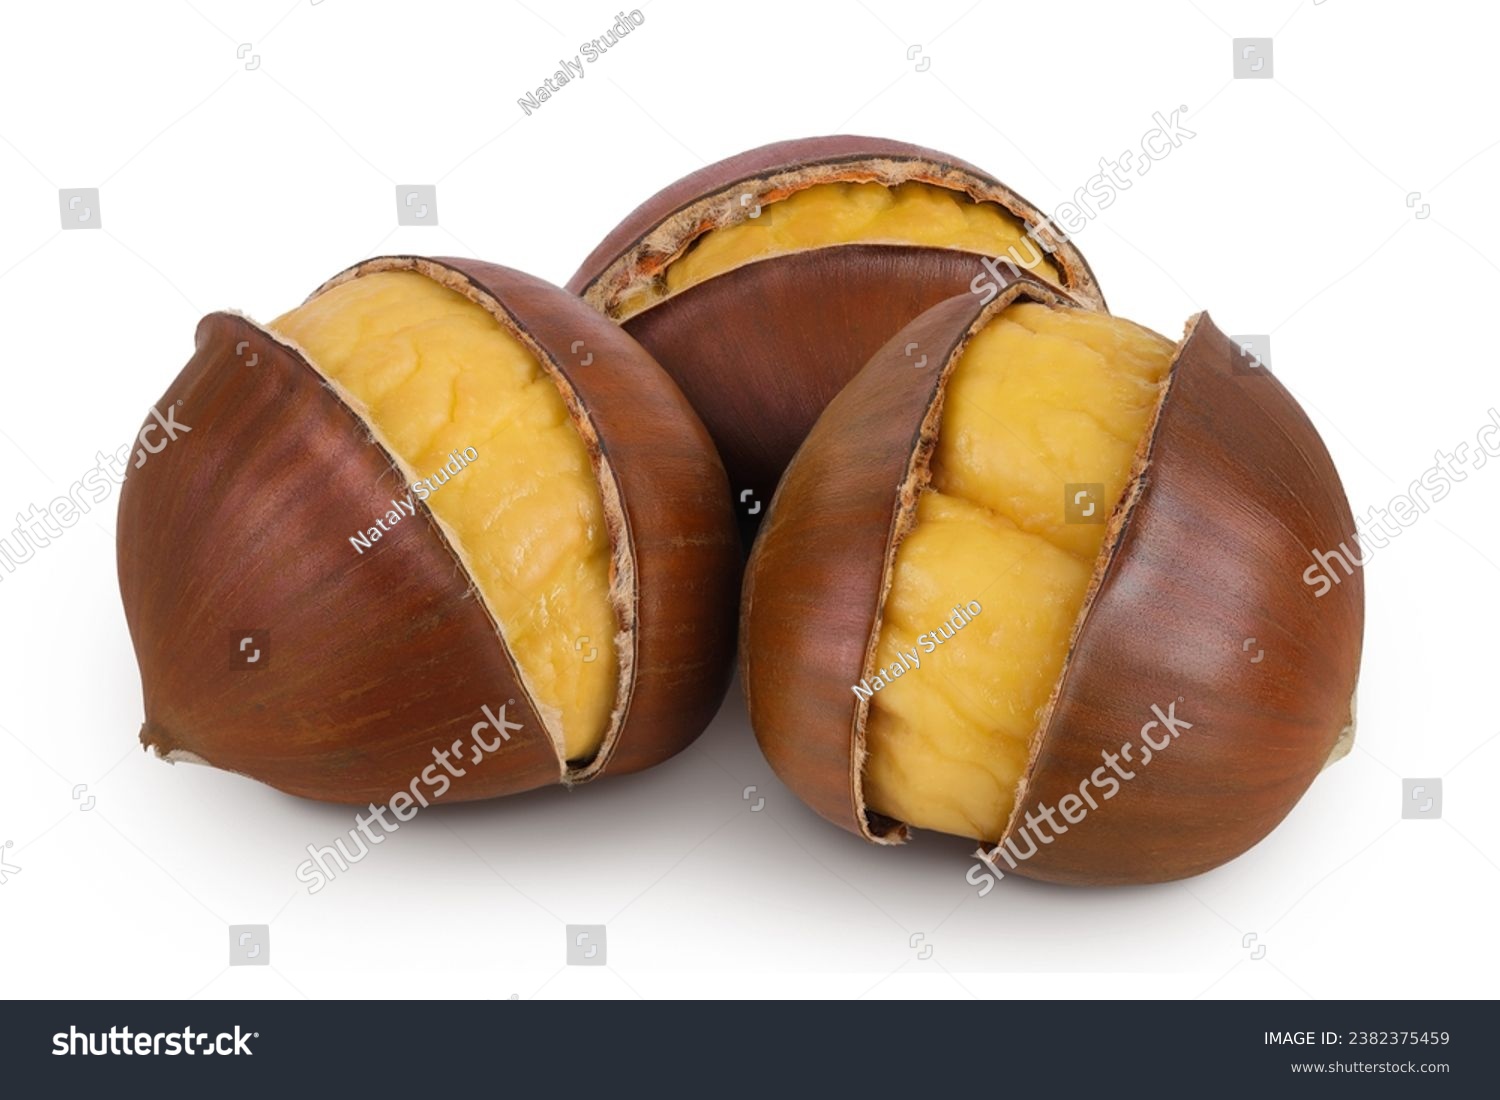 roasted chestnut isolated on white background wit full depth of field. #2382375459